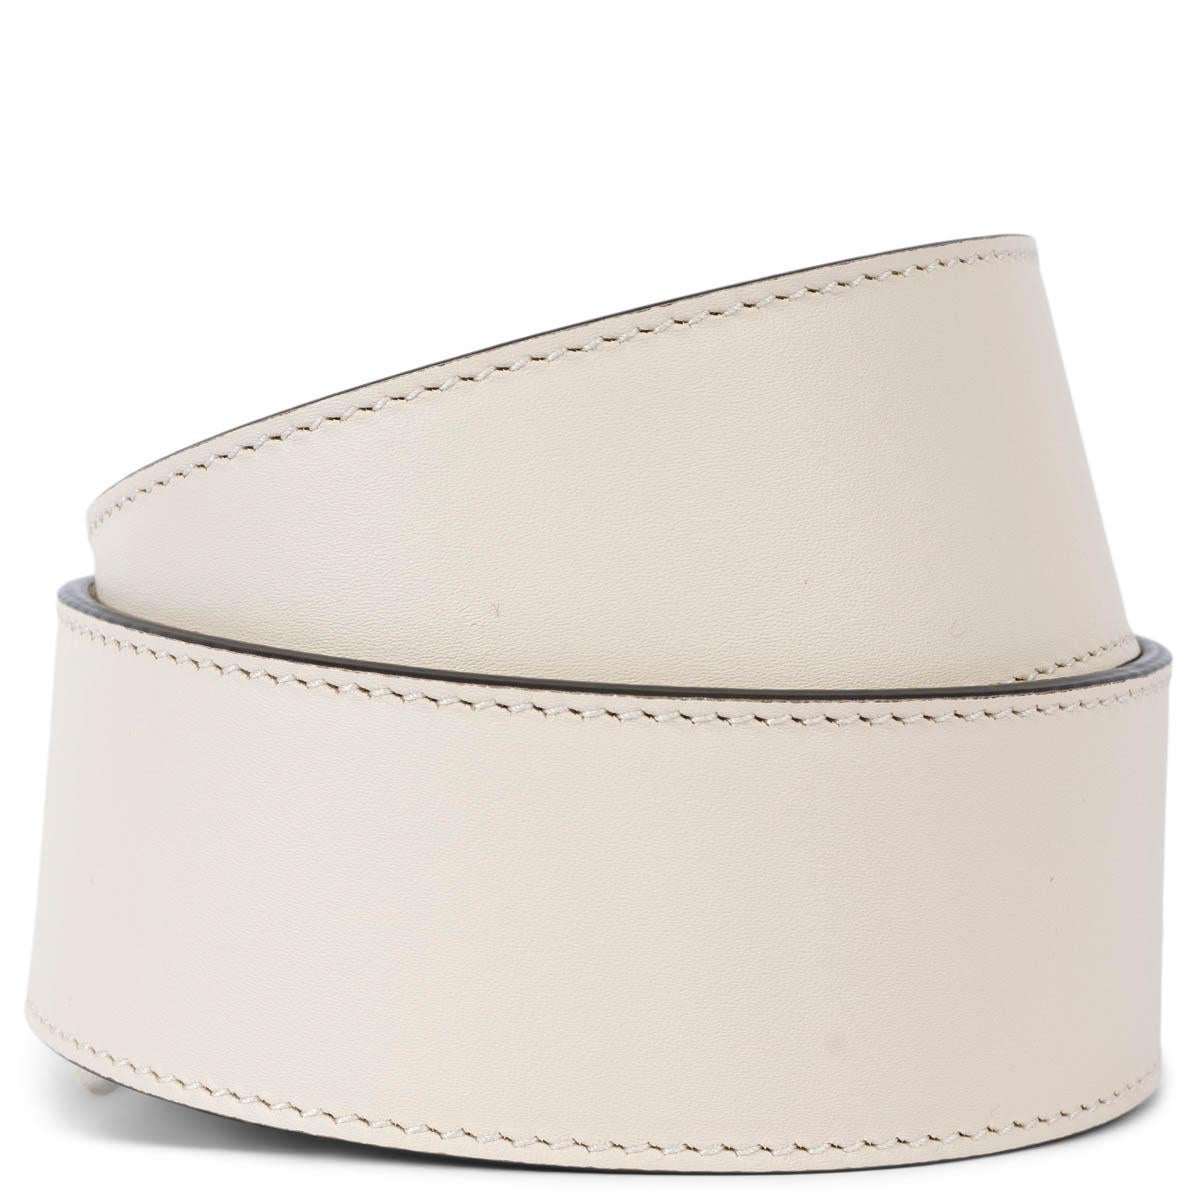 100% authentic Gucci GG Marmont belt in ivory smooth calfskin featuring iconic antique gold-tone metal buckle. Brand new. Comes with box and dust bag. 

Measurements
Tag Size	85
Size	85cm (33.2in)
Width	4cm (1.6in)
Fits	80cm (31.2in) to 90cm